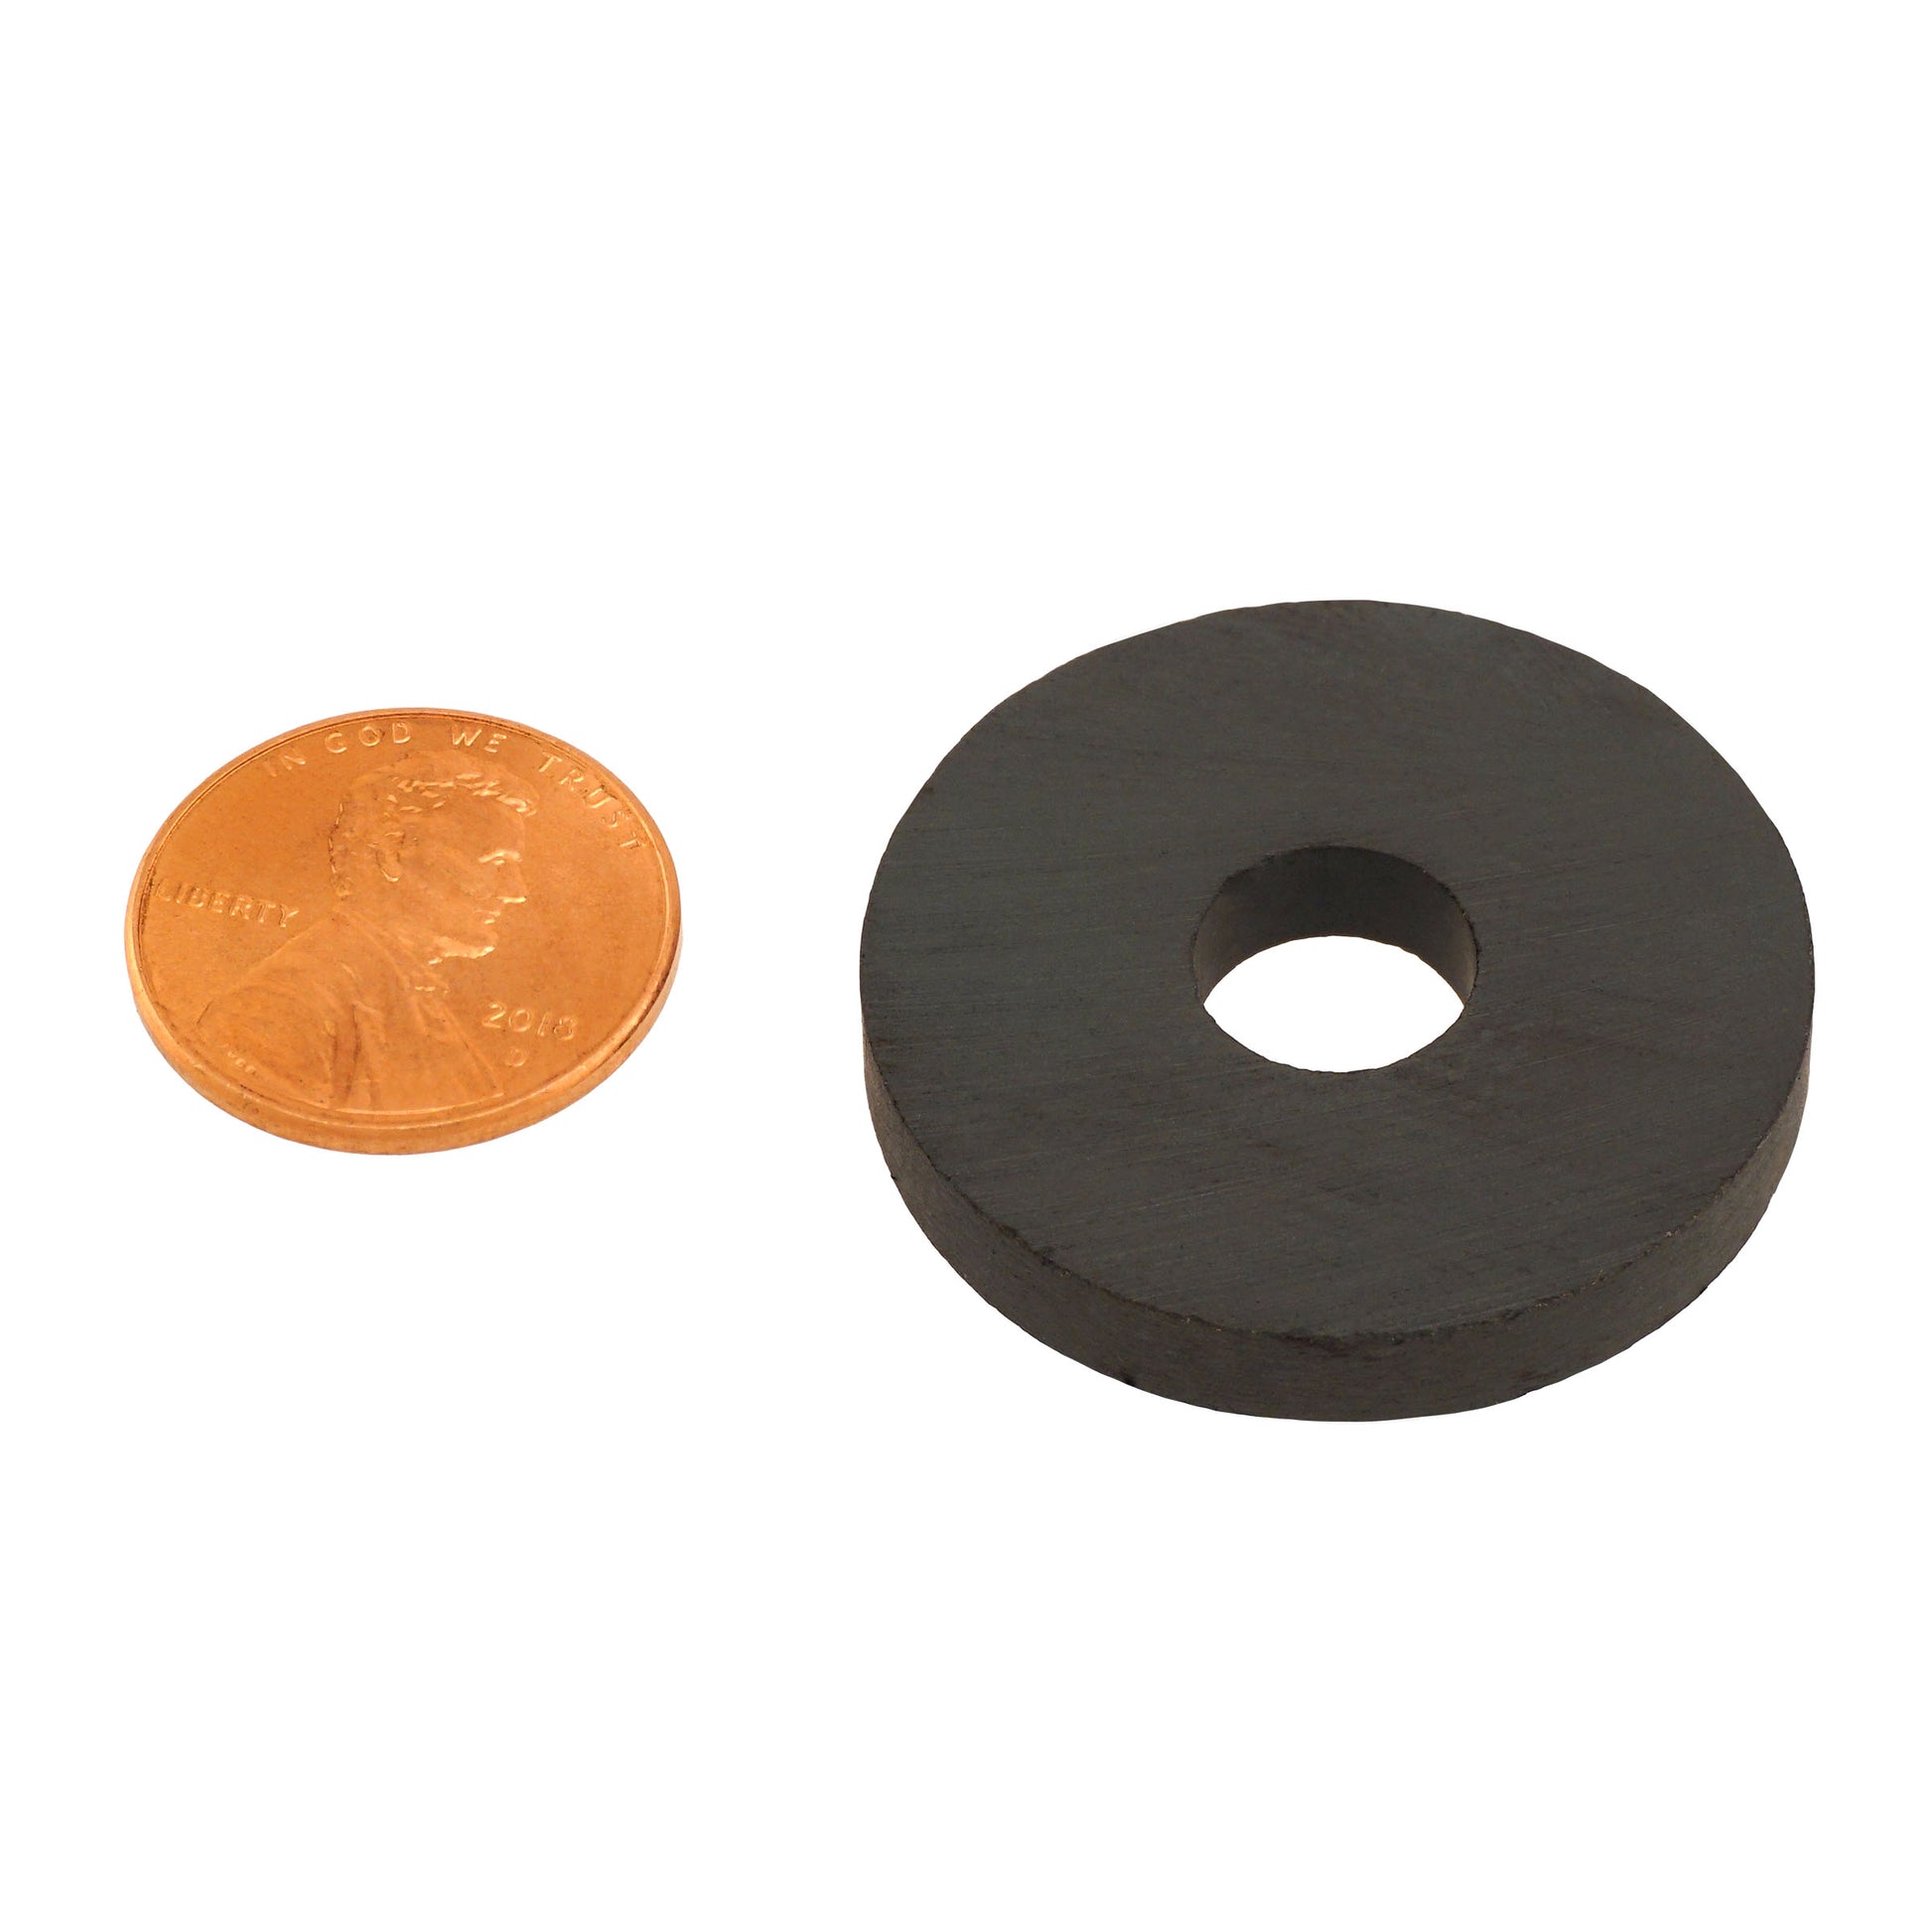 Load image into Gallery viewer, CR145C Ceramic Ring Magnet - Compared to Penny for Size Reference